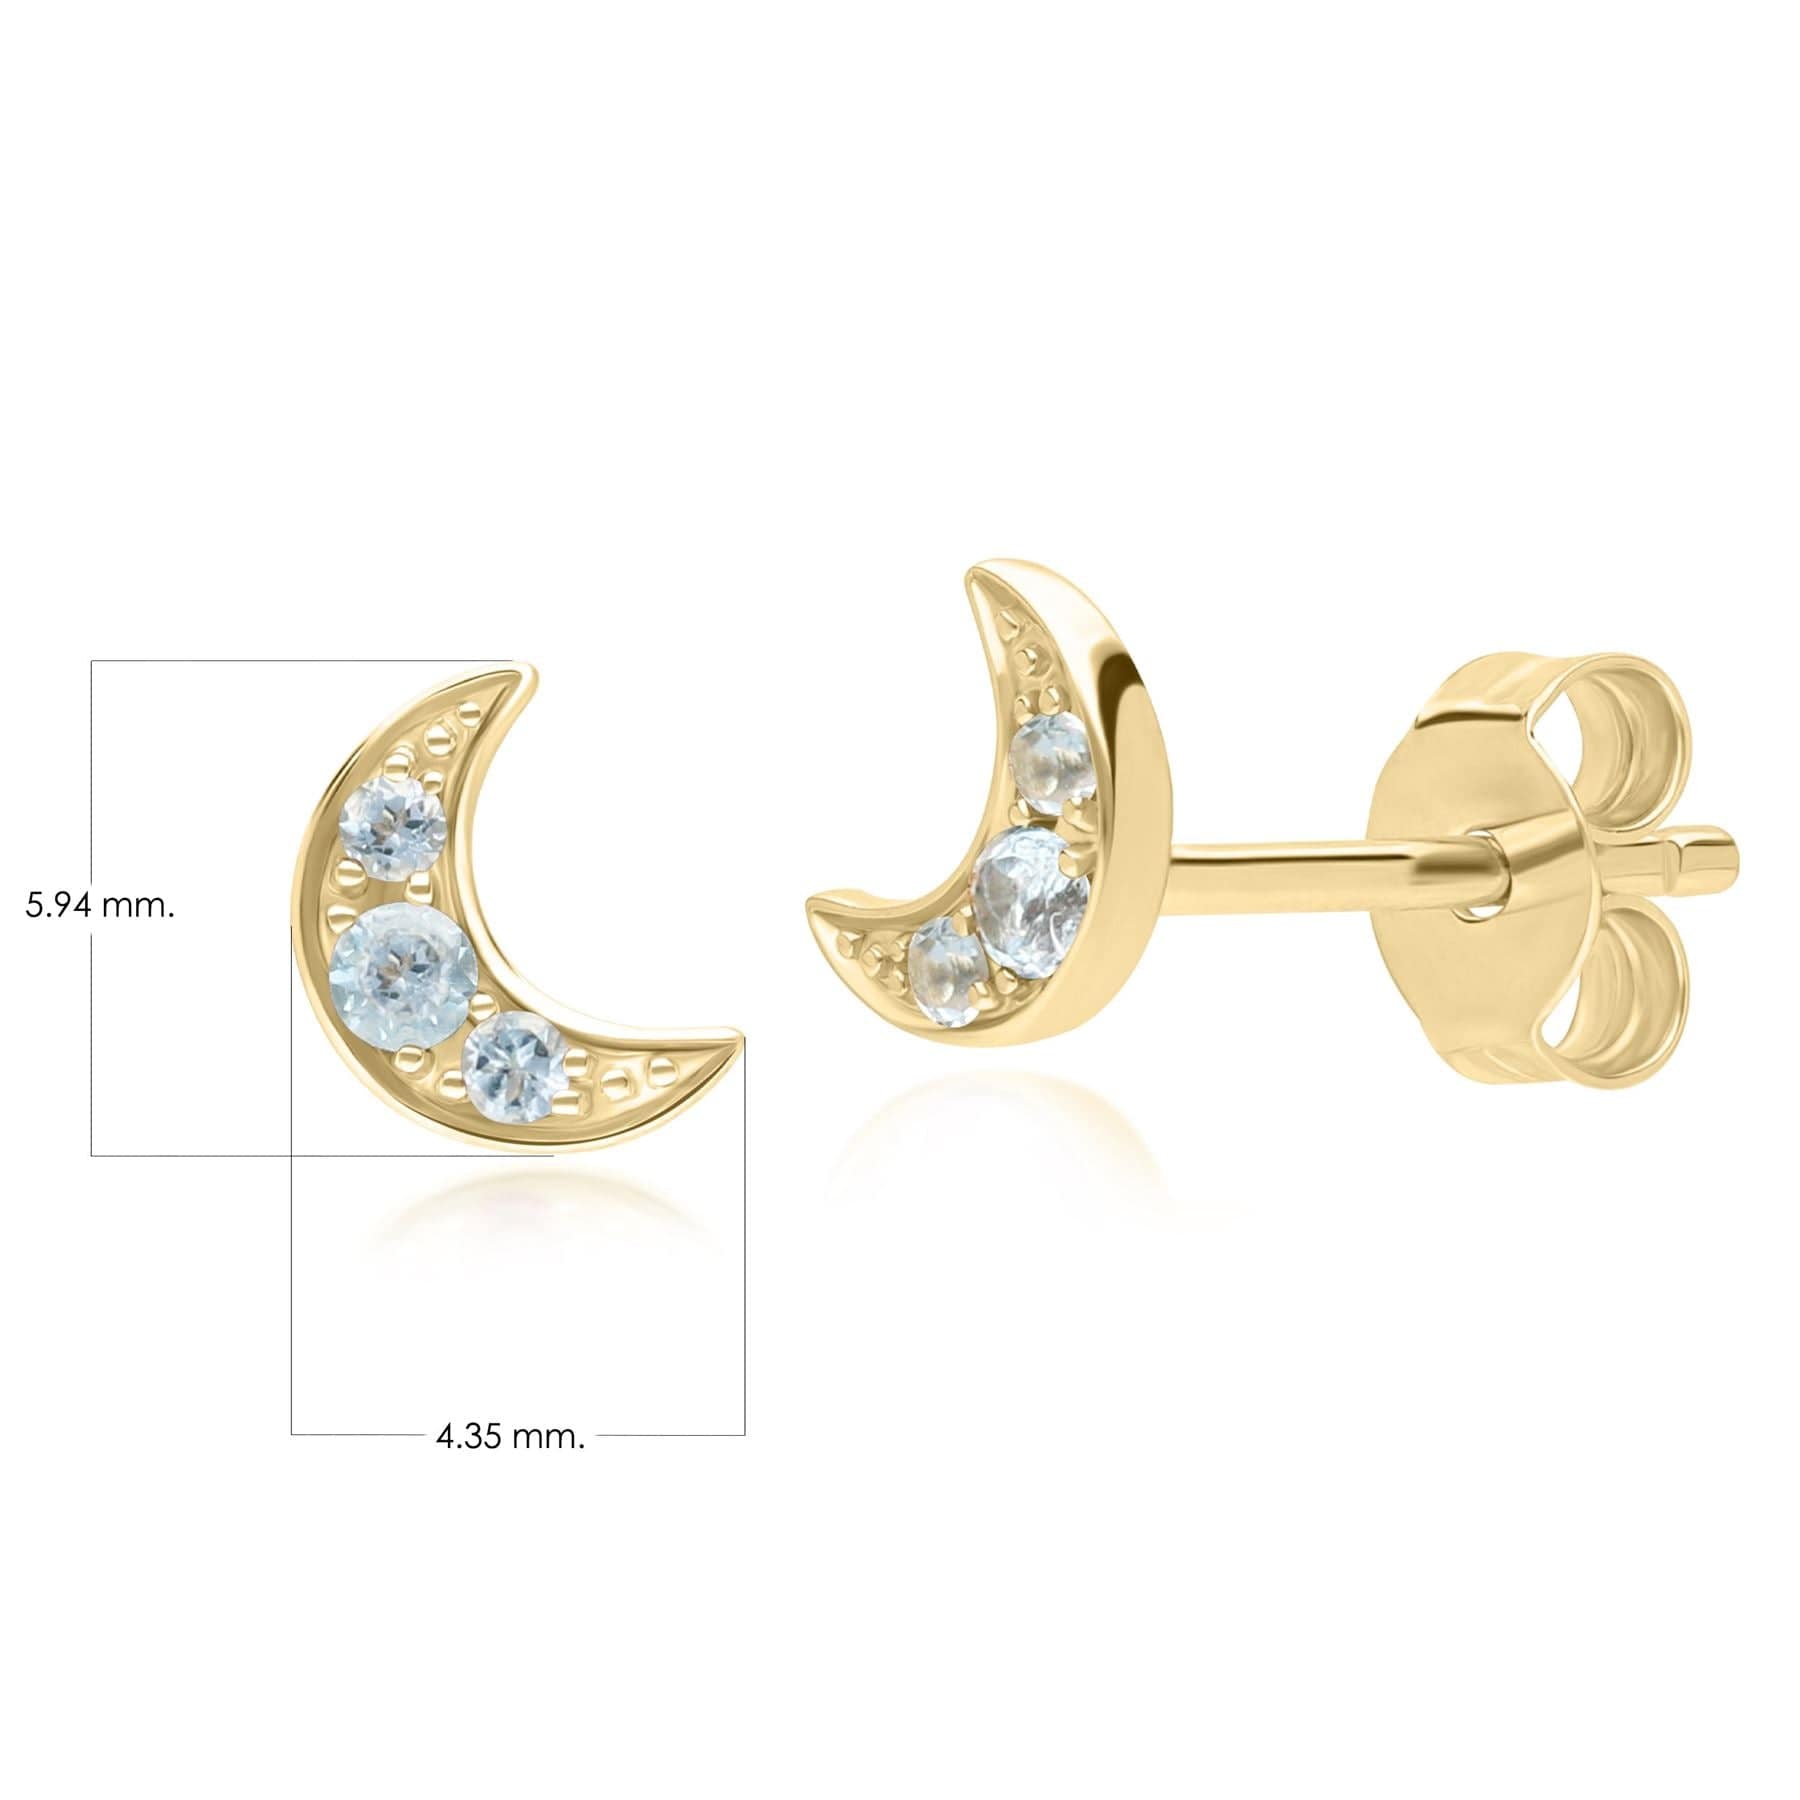 135E1819039 Night Sky Topaz Moon Stud Earrings in 9ct Yellow Gold Dimensions